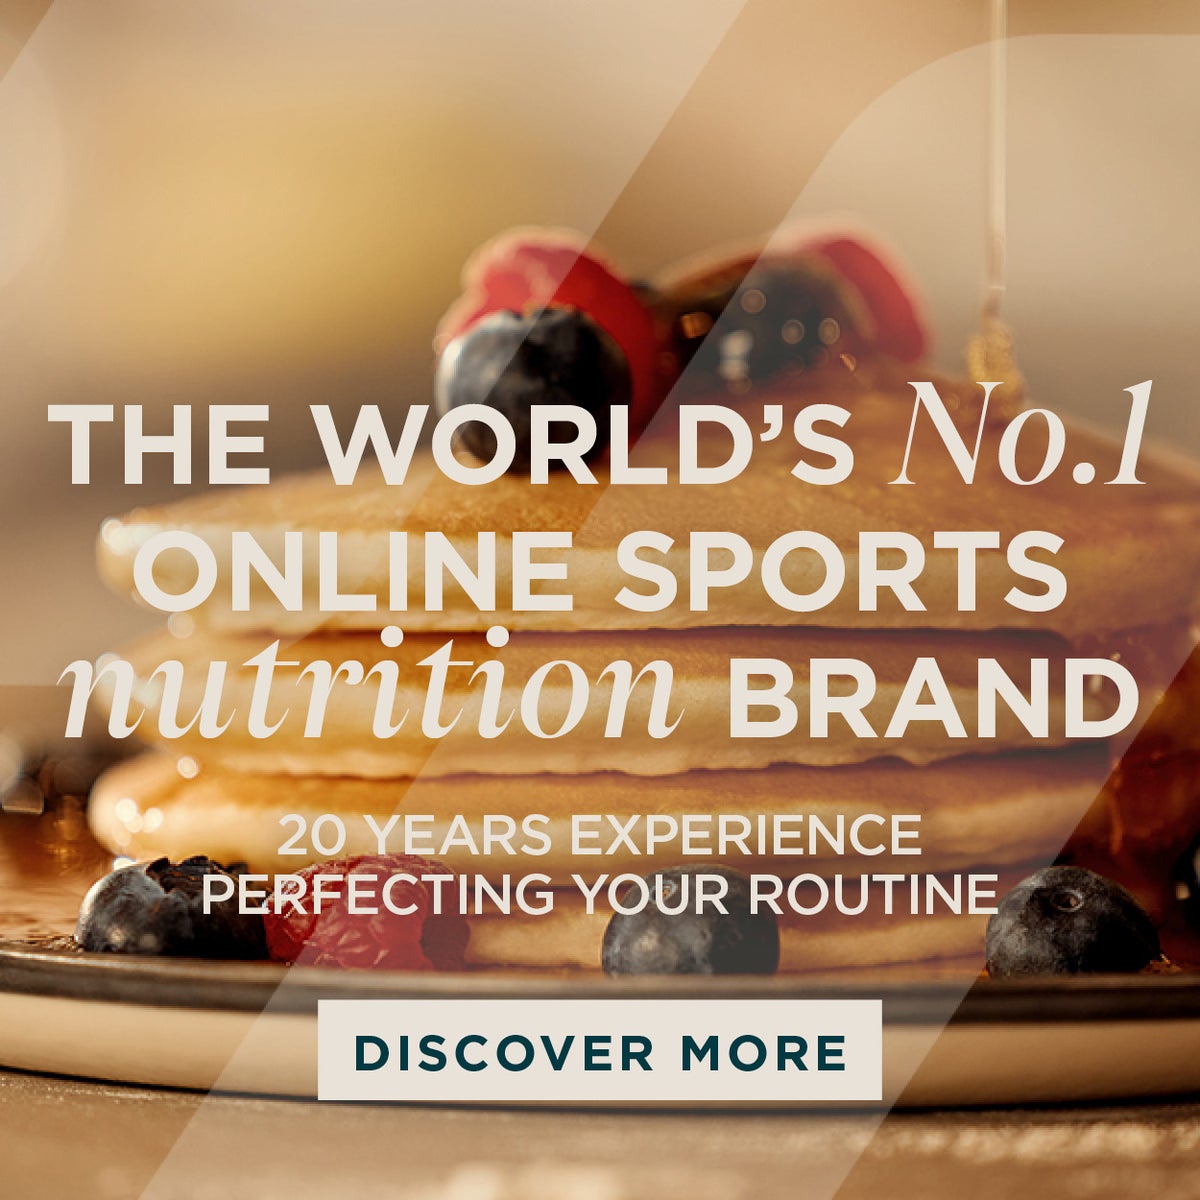 The Worlds number 1 online sports nutrition brand. 20 years experience perfecting your routine.